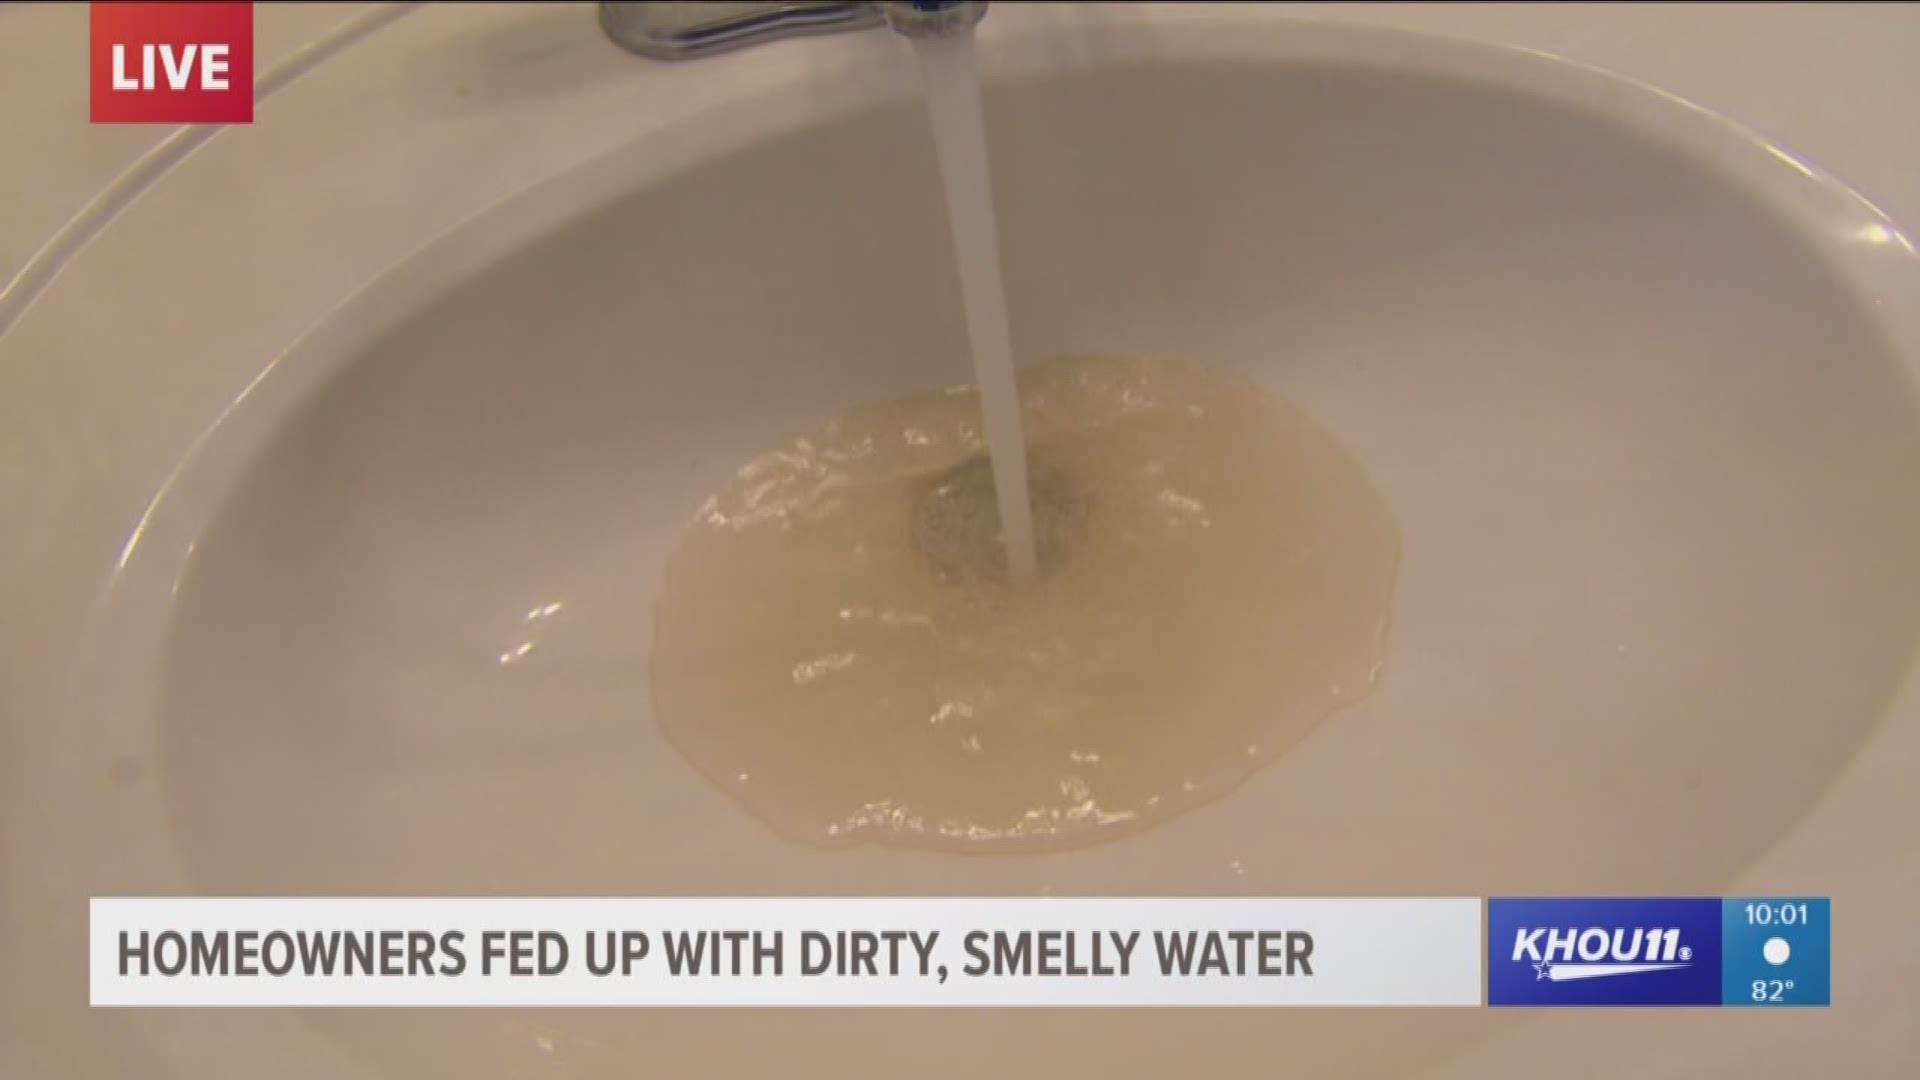 Pearland homeowners are fed up with the dirty, smelly water.